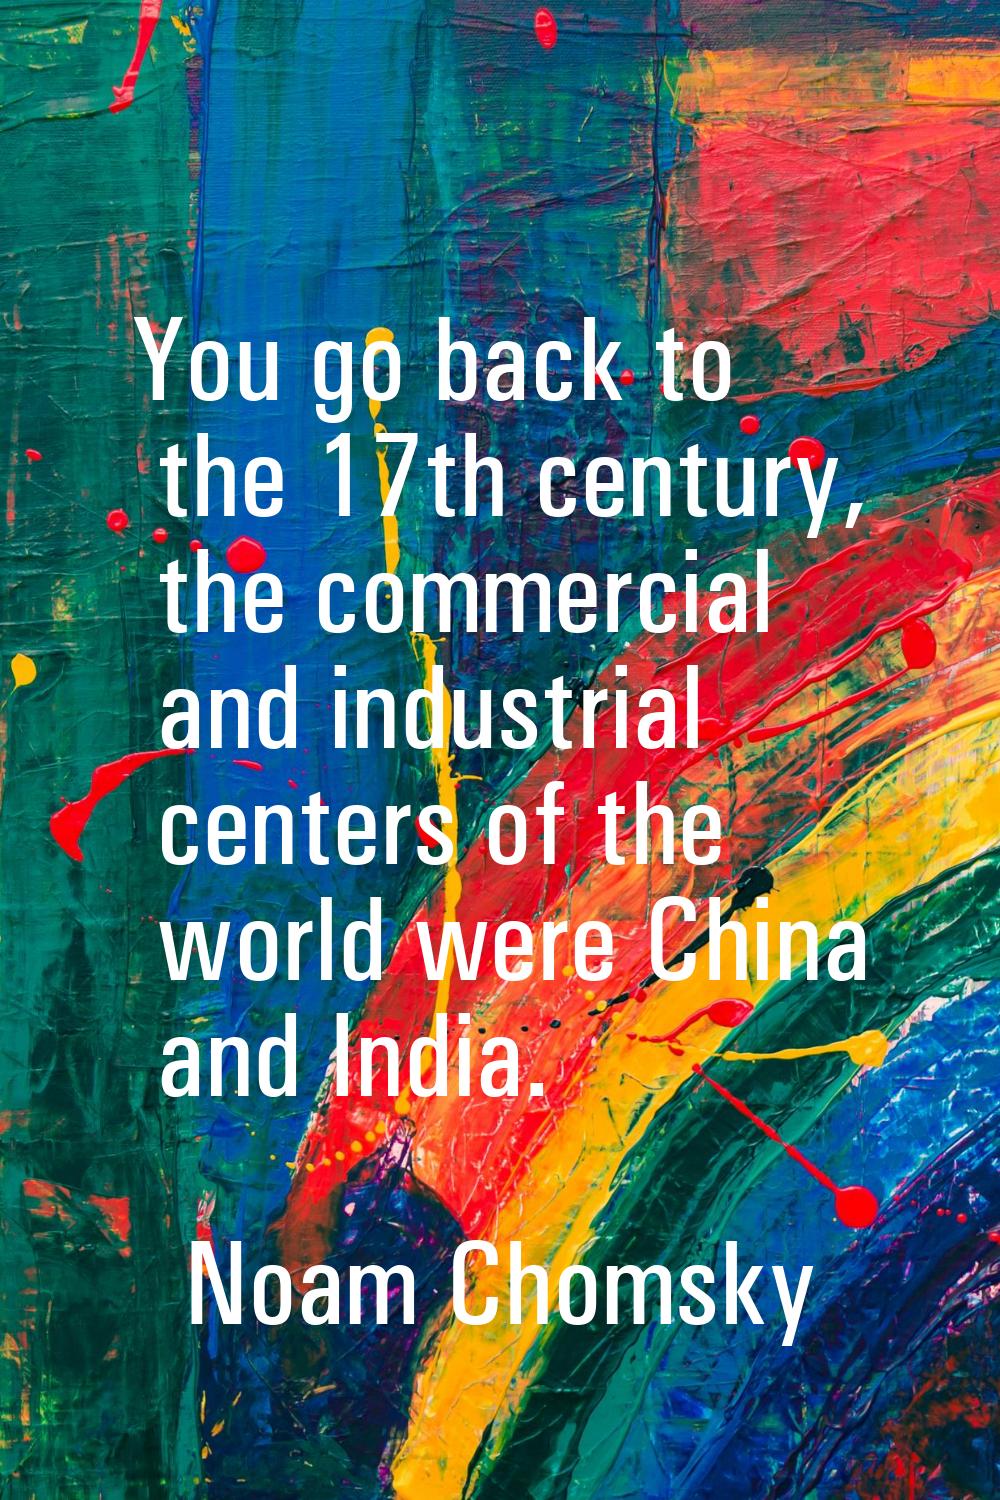 You go back to the 17th century, the commercial and industrial centers of the world were China and 